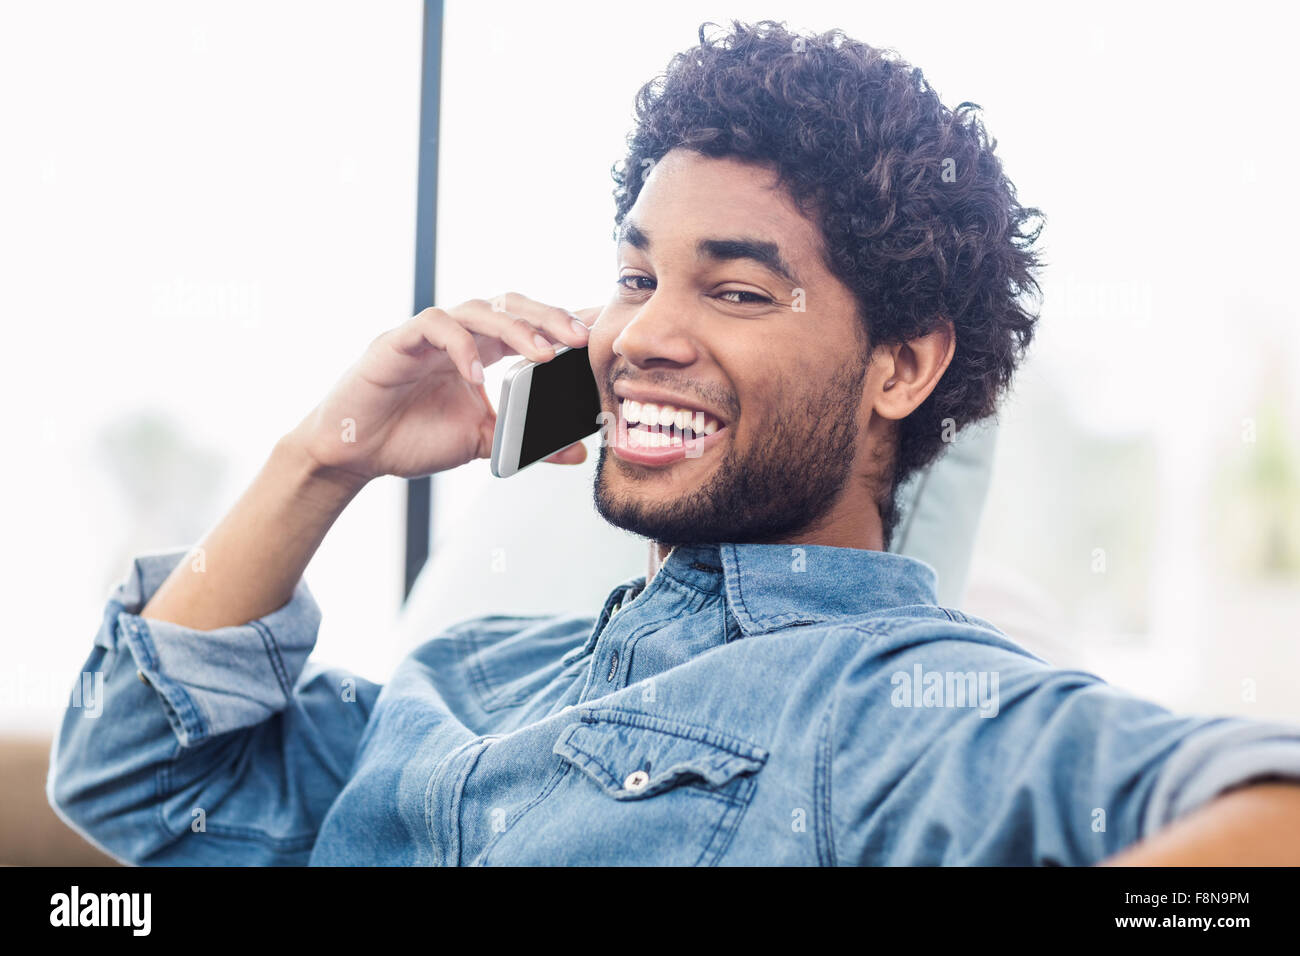 Handsome smiling man on phone call Stock Photo